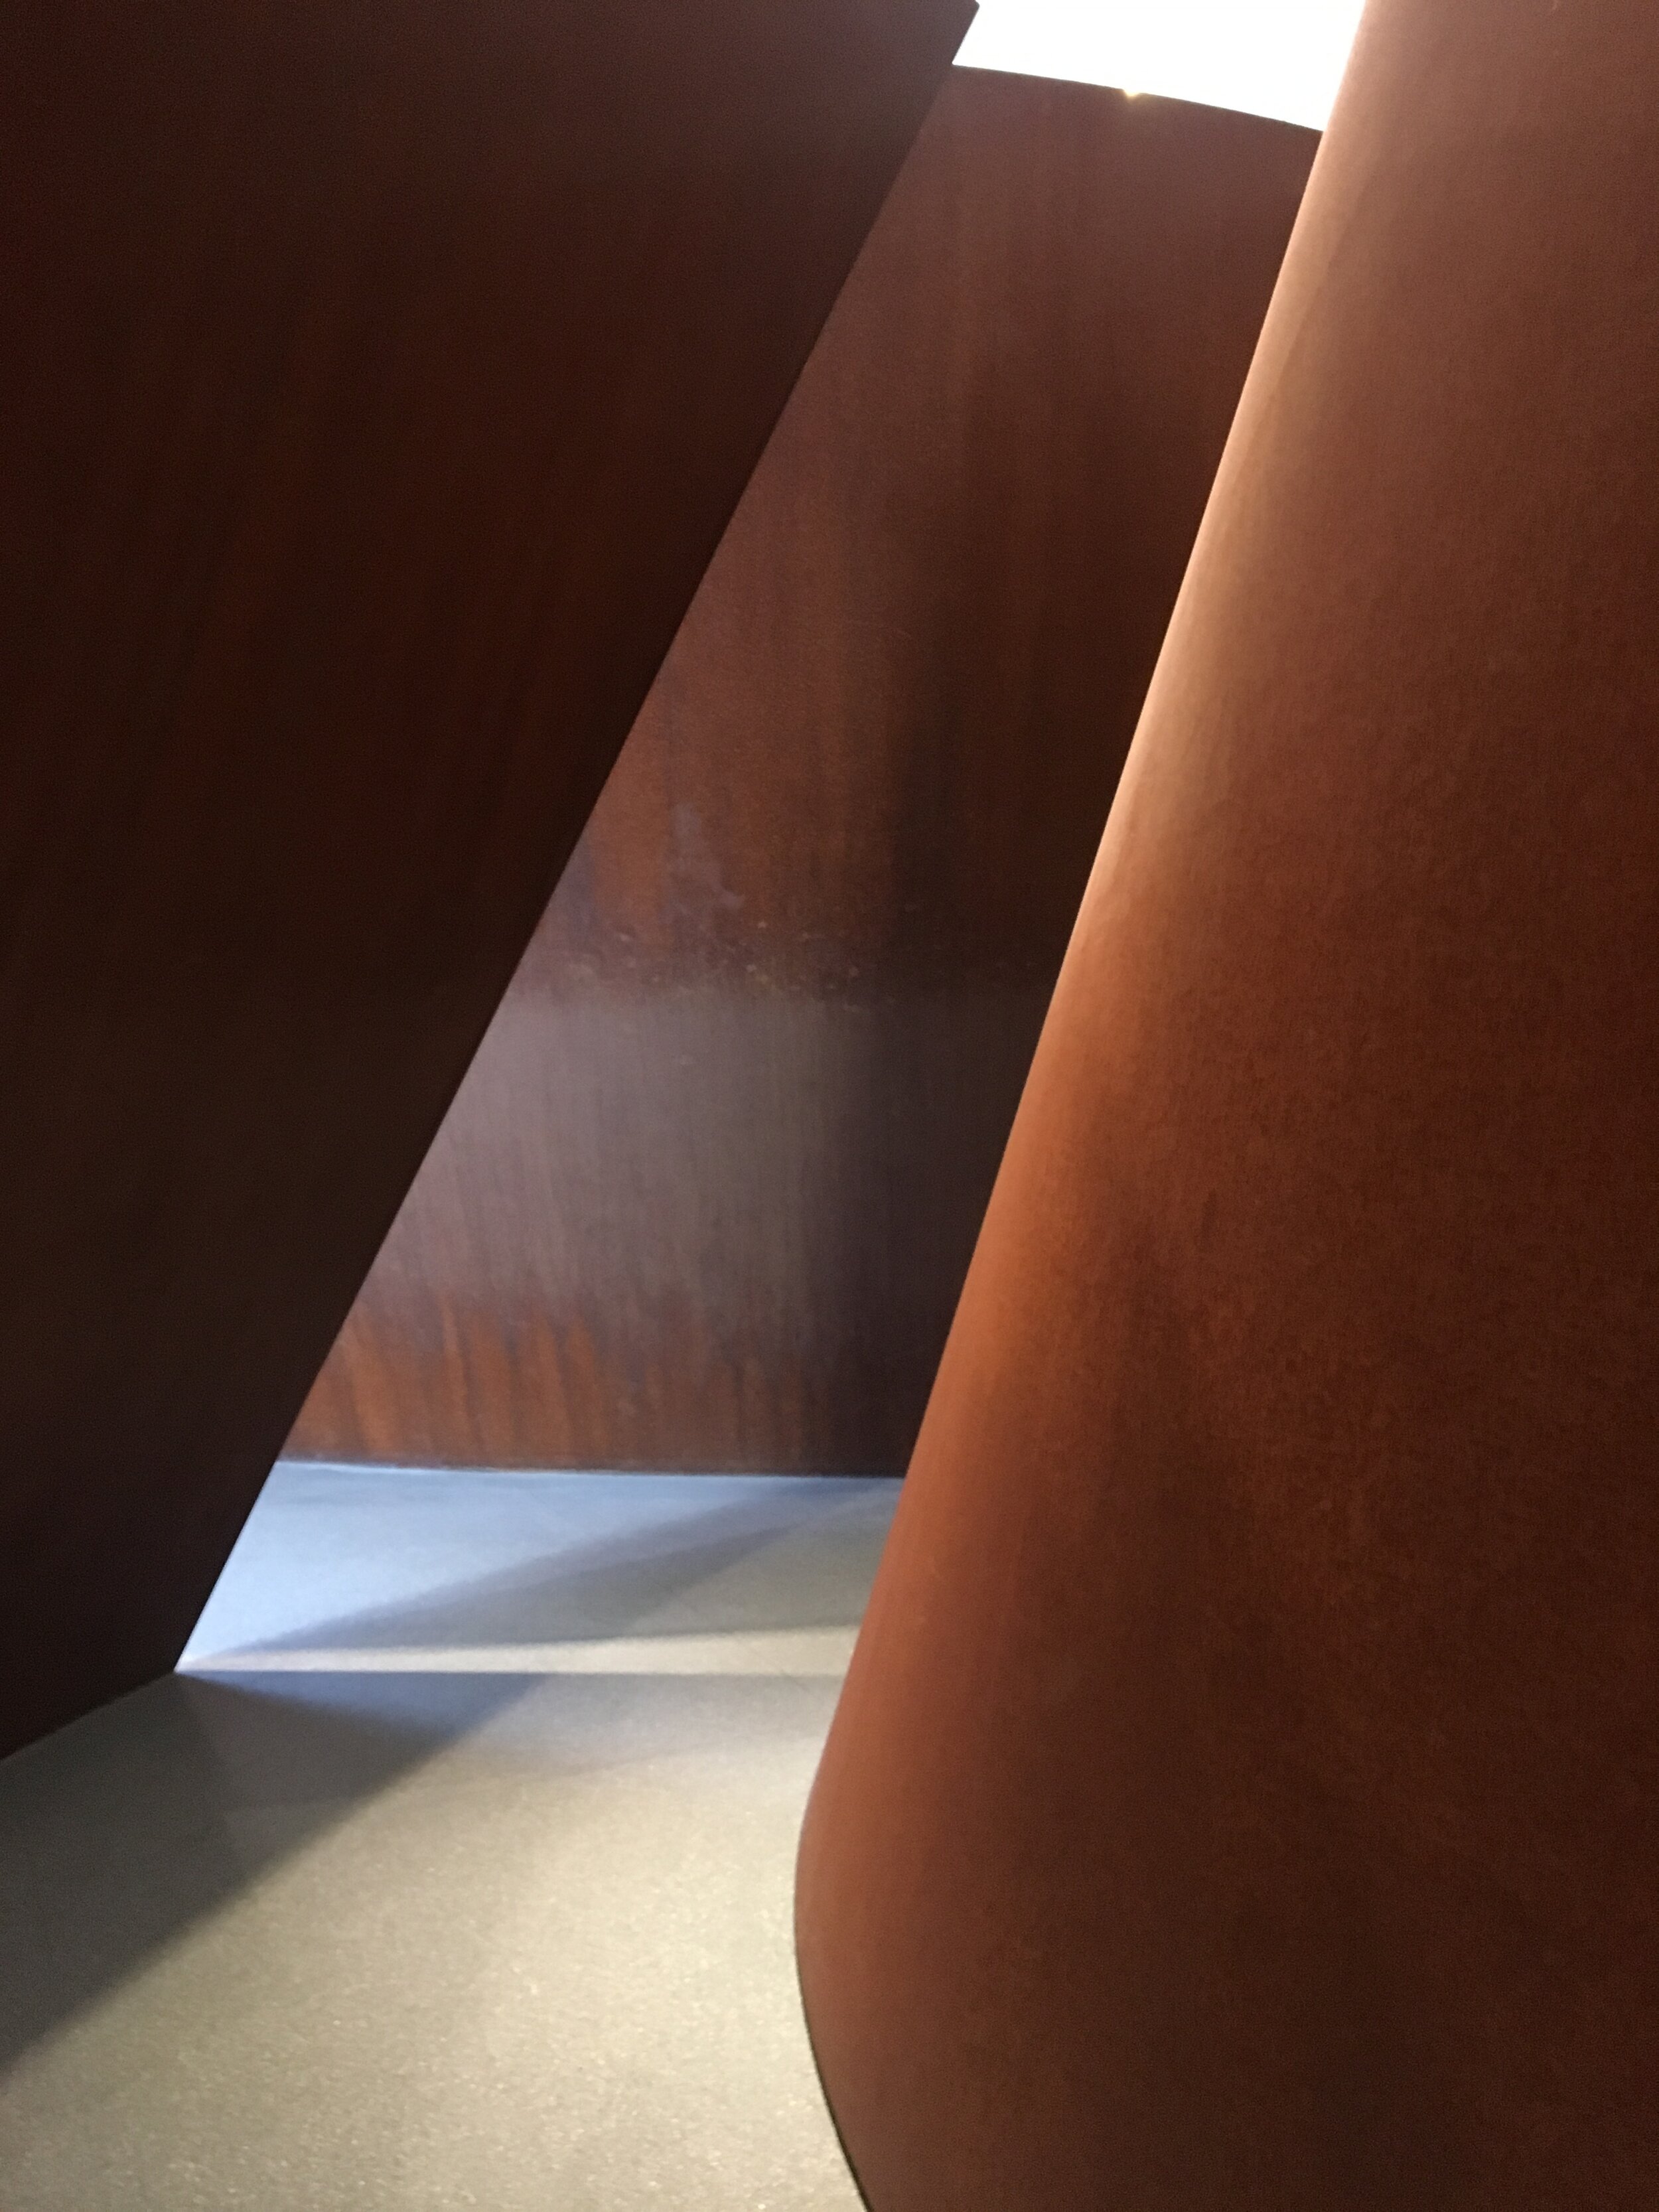 Sequence by Richard Serra in SFMOMA, Image courtesy of Bradley Tomy